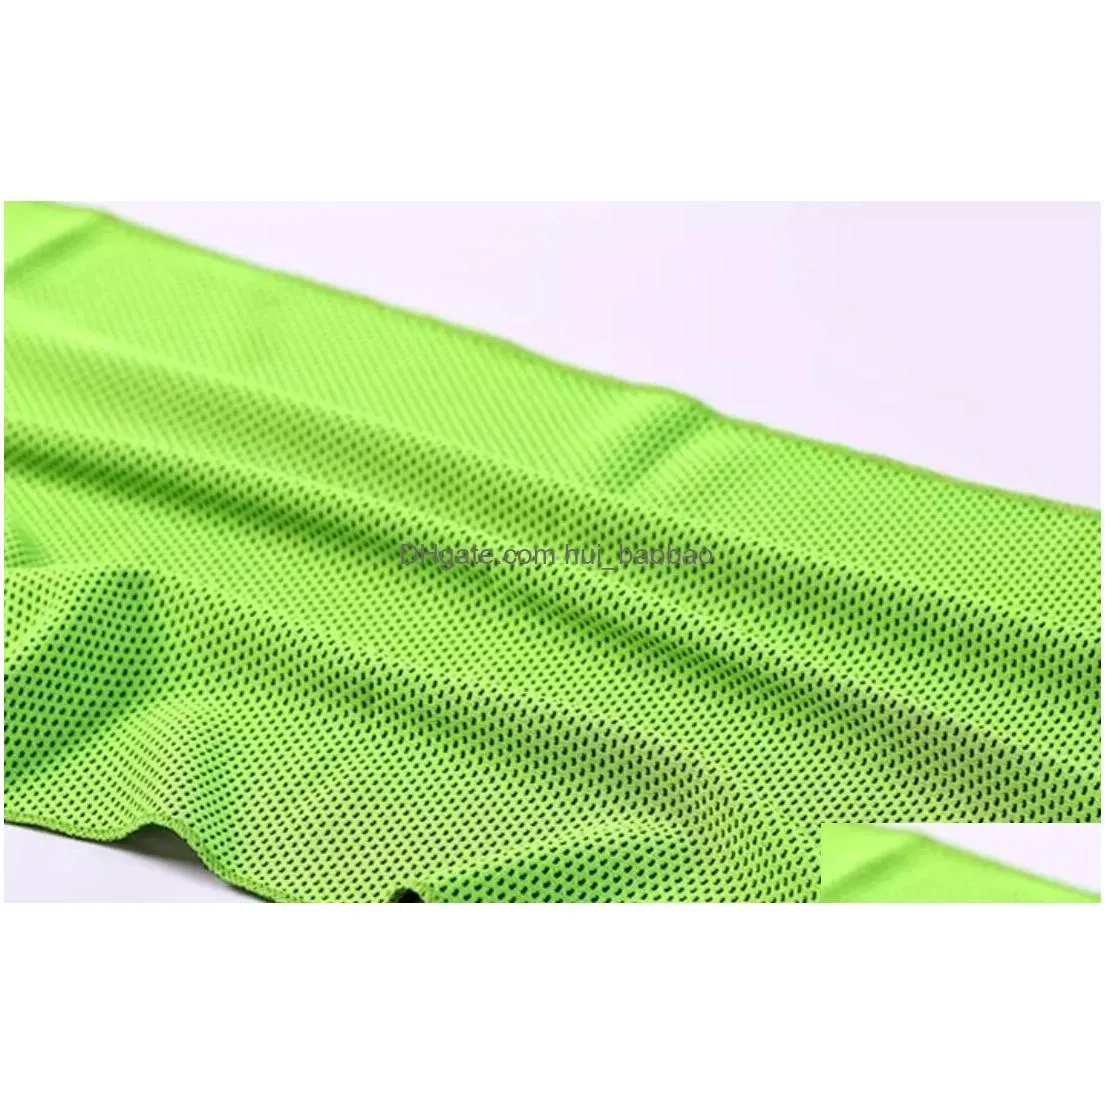 titanium sport accessories cooling towel 100pcs 30x90cm ice cold sports opp bag summer sun stroke exercise polyester soft breathable